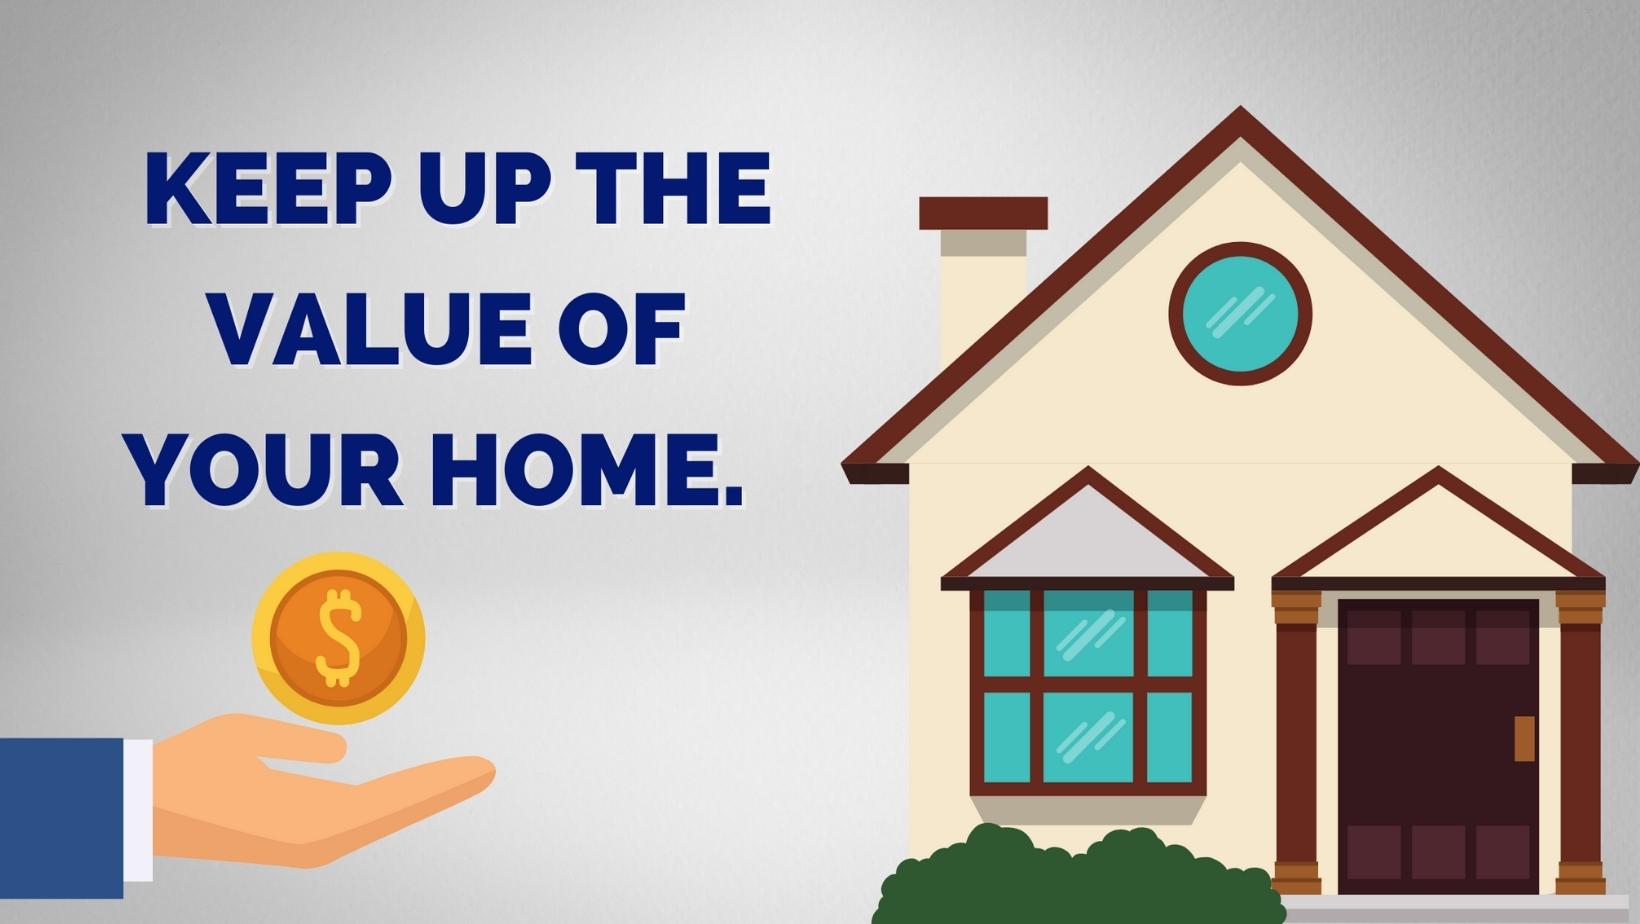 The graphic contains a rendering of a house next to a hand holding money. Above is text which reads "Keep up the value of your home."